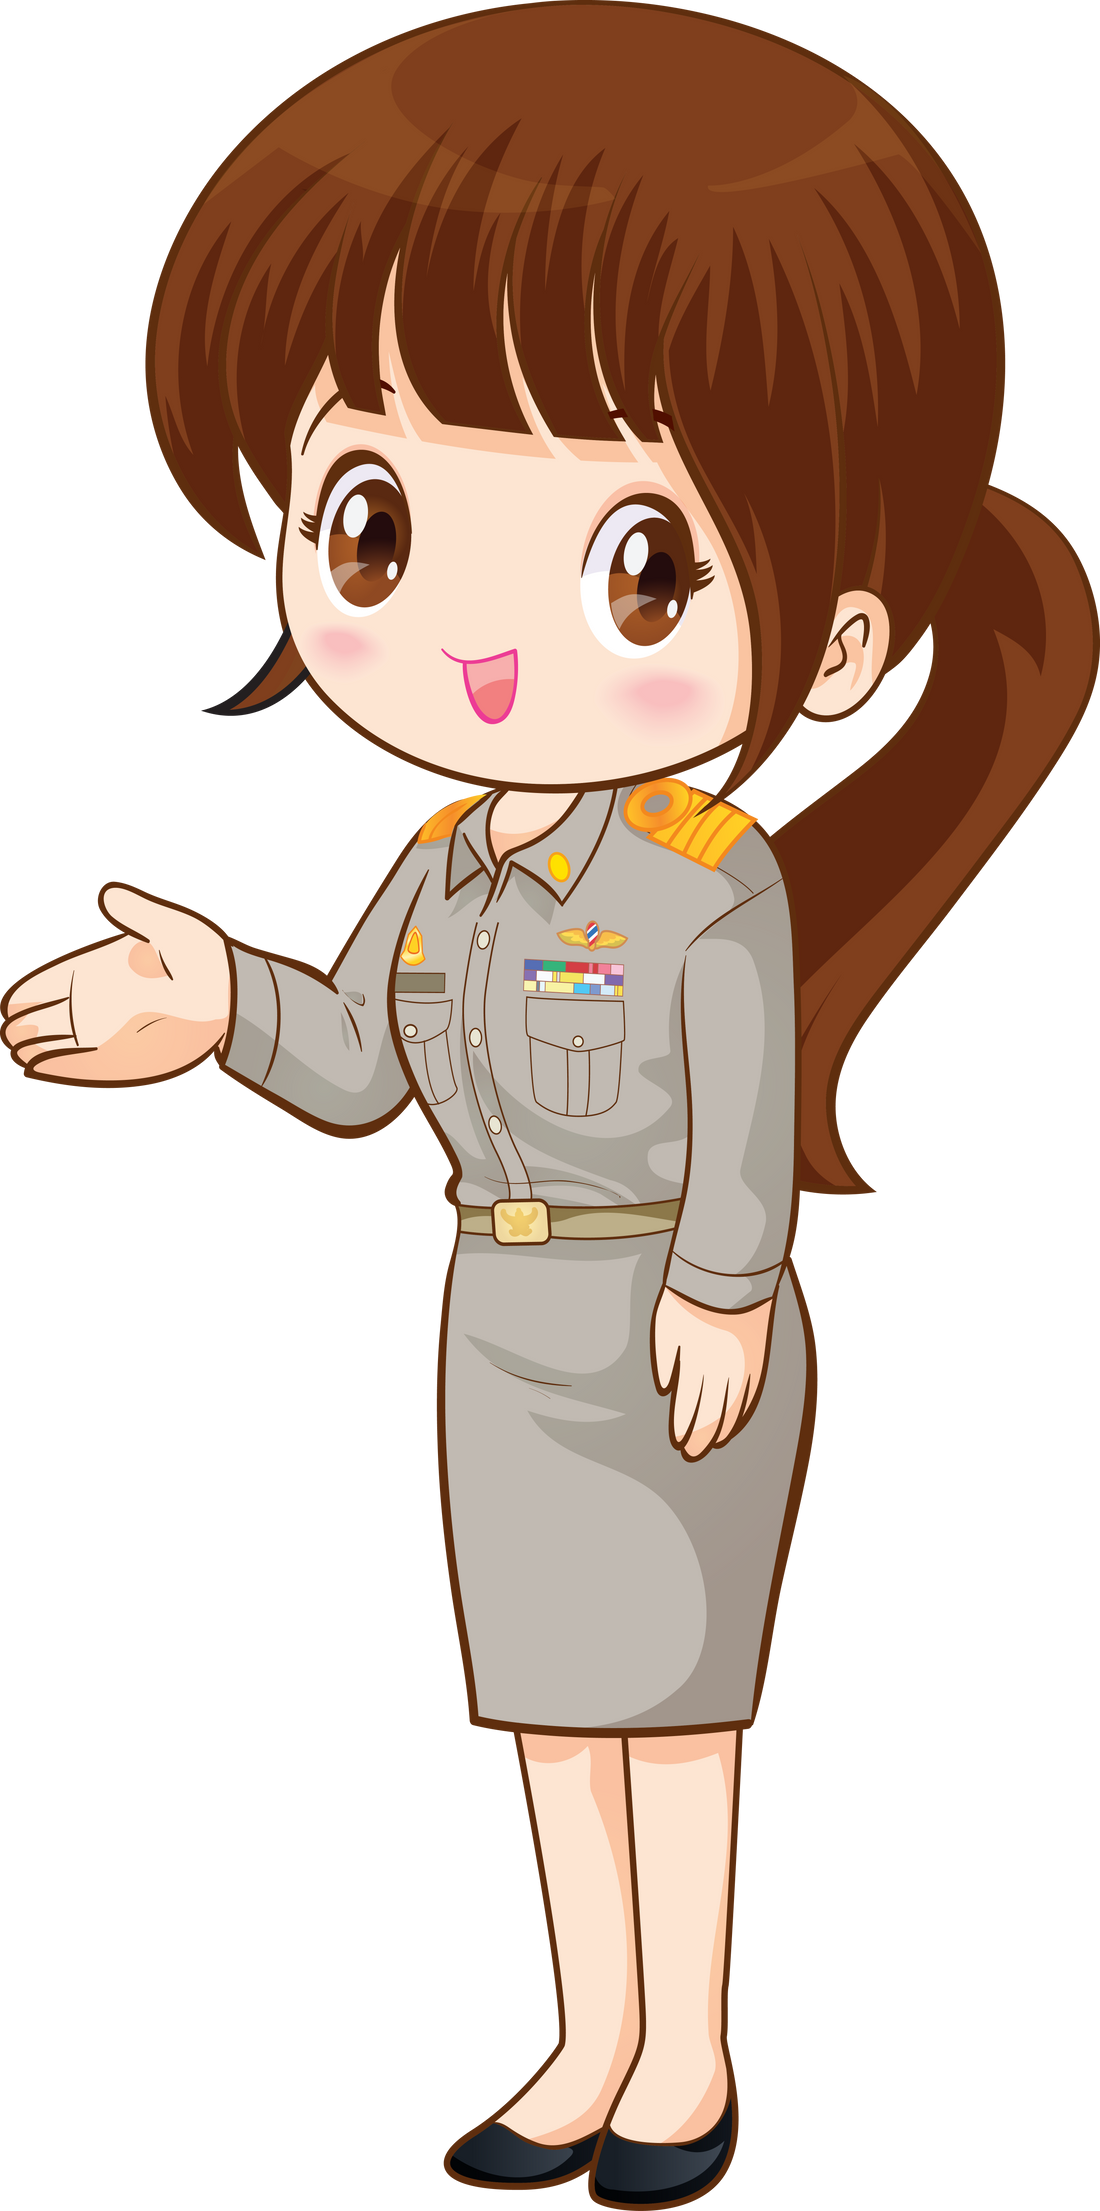 Thai Government Officer character in welcome and sawasdee